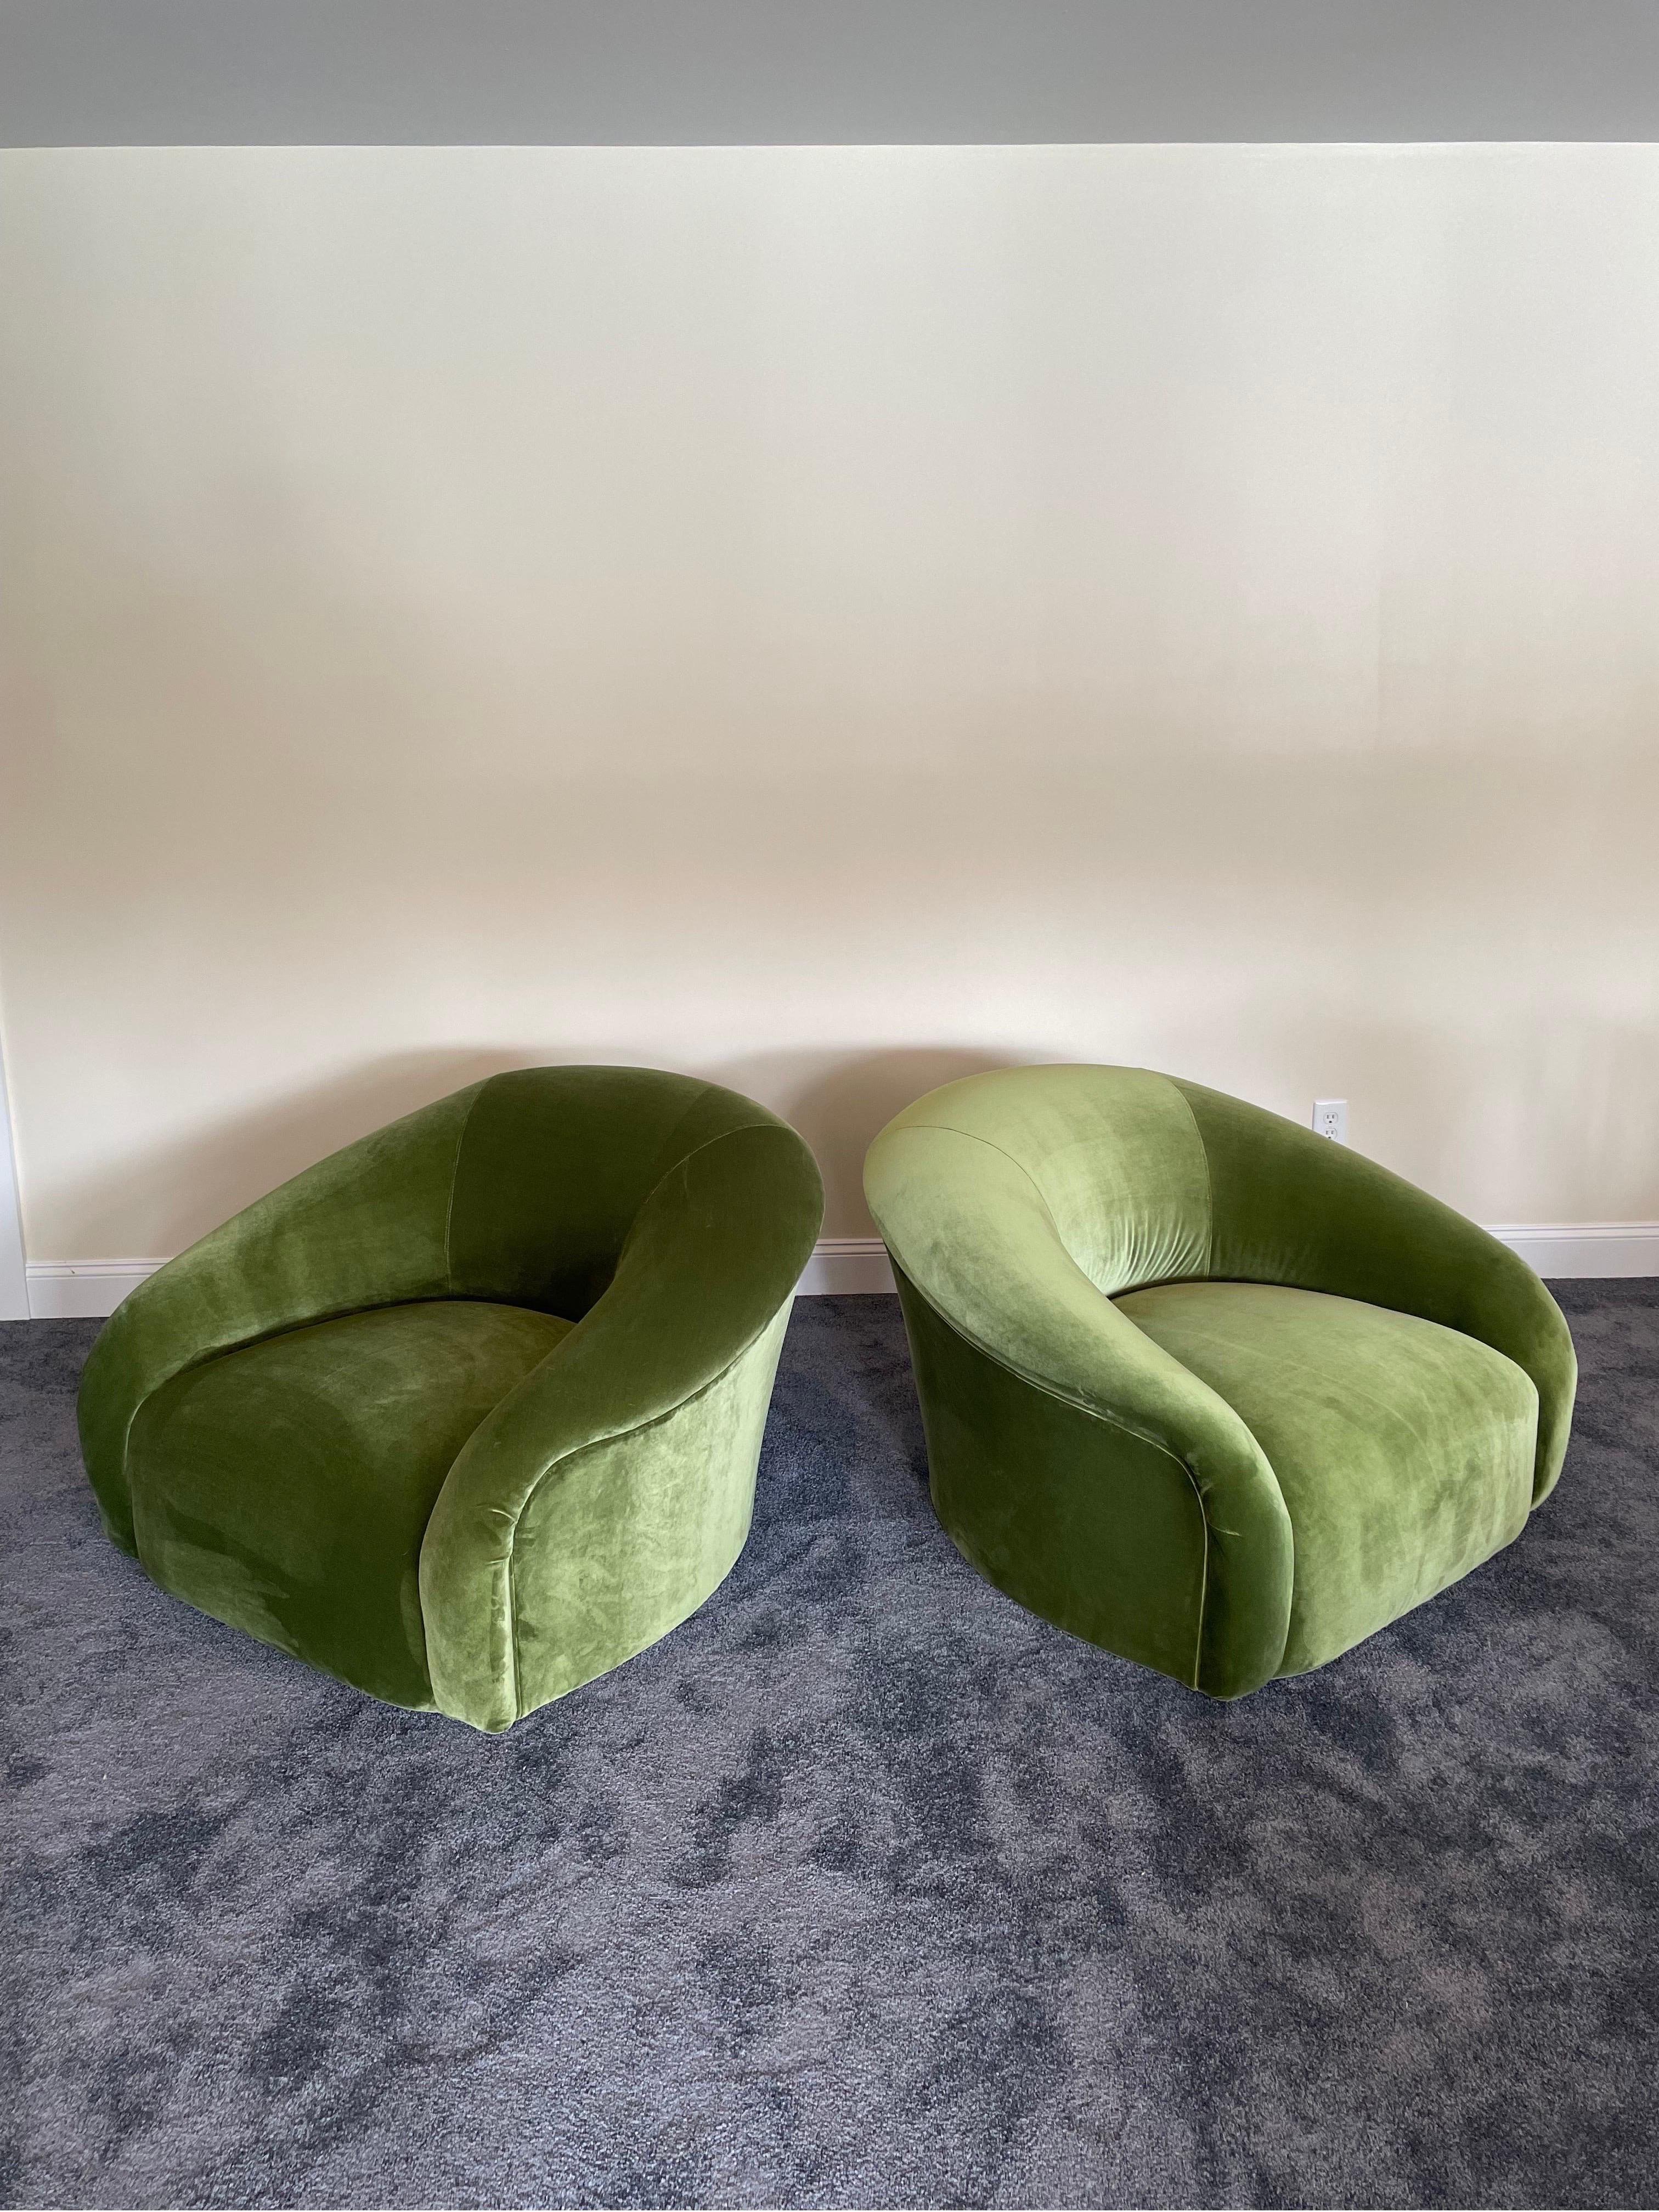 Vintage Oversized Tub Chairs by Sally Sirkin Lewis for J Robert Scott- a Pair In Good Condition For Sale In Roanoke, VA